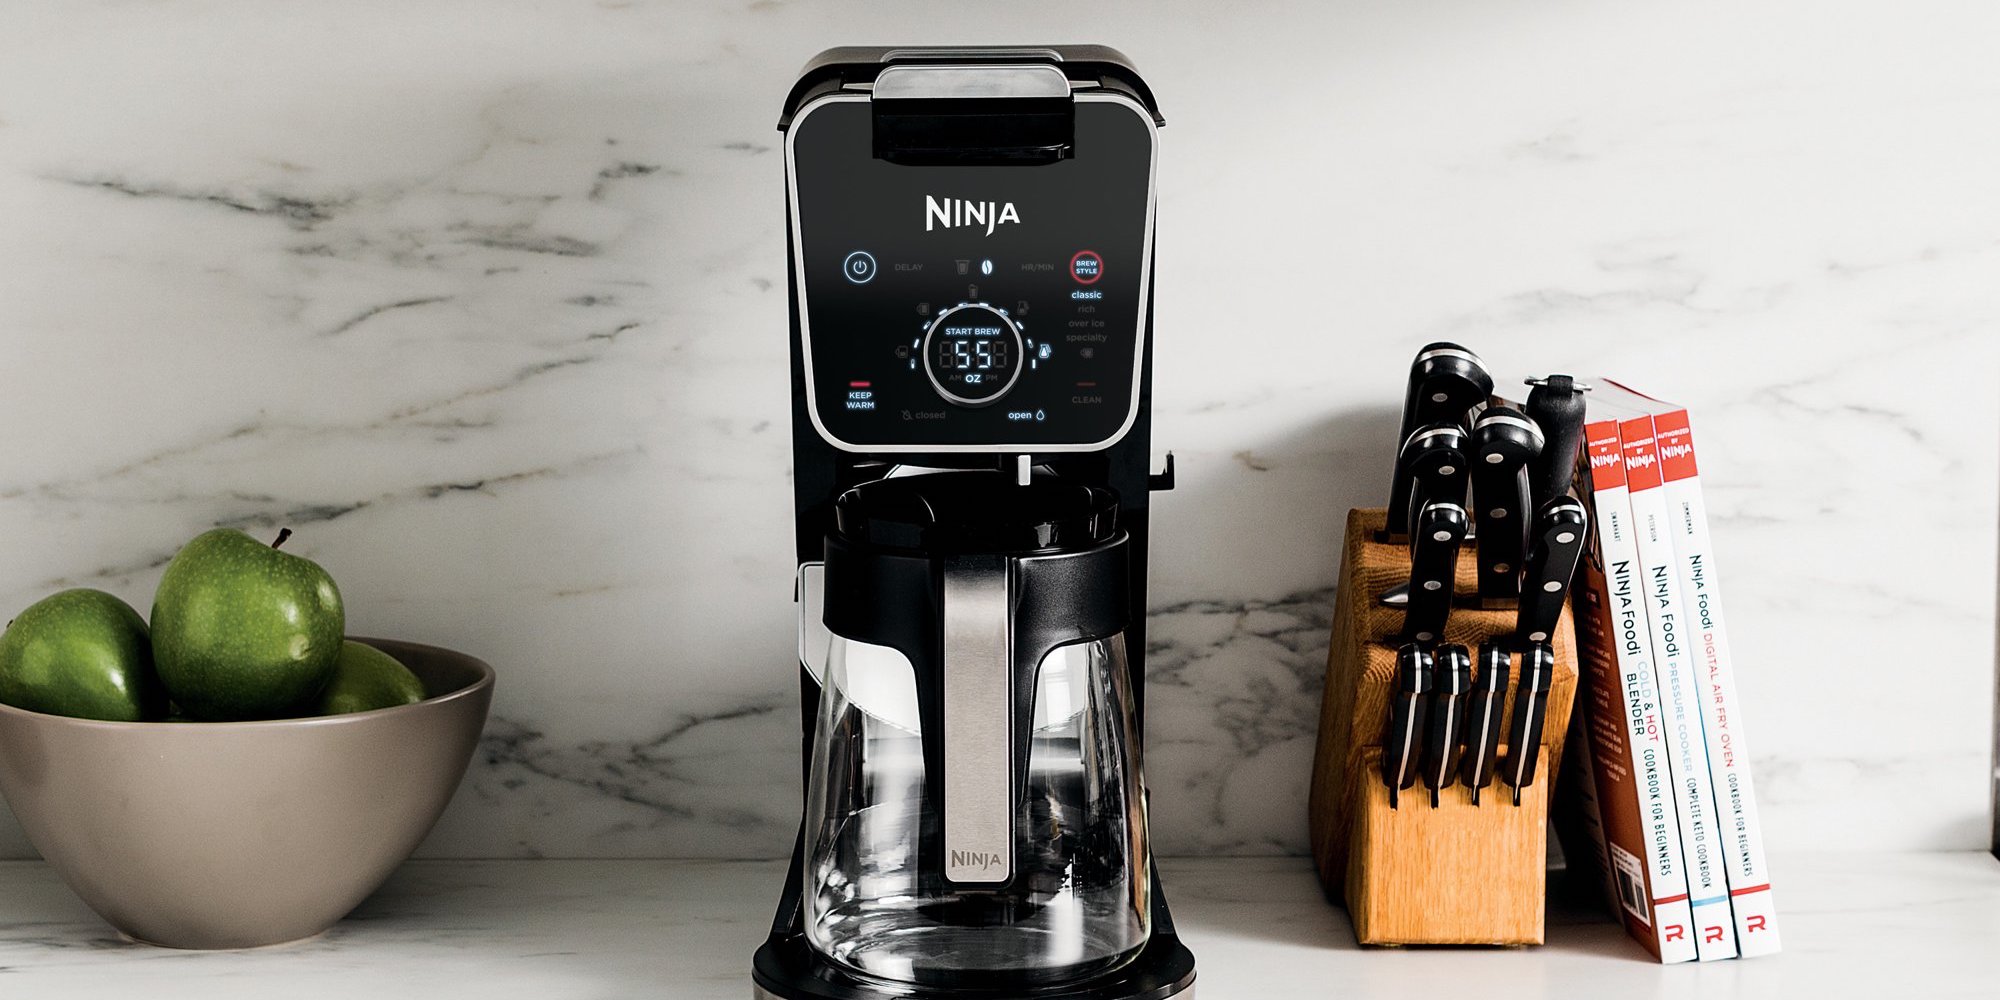 Ninja Dual pod and ground bean coffee brewer with milk frother now $100  ($100 off, Refurb)